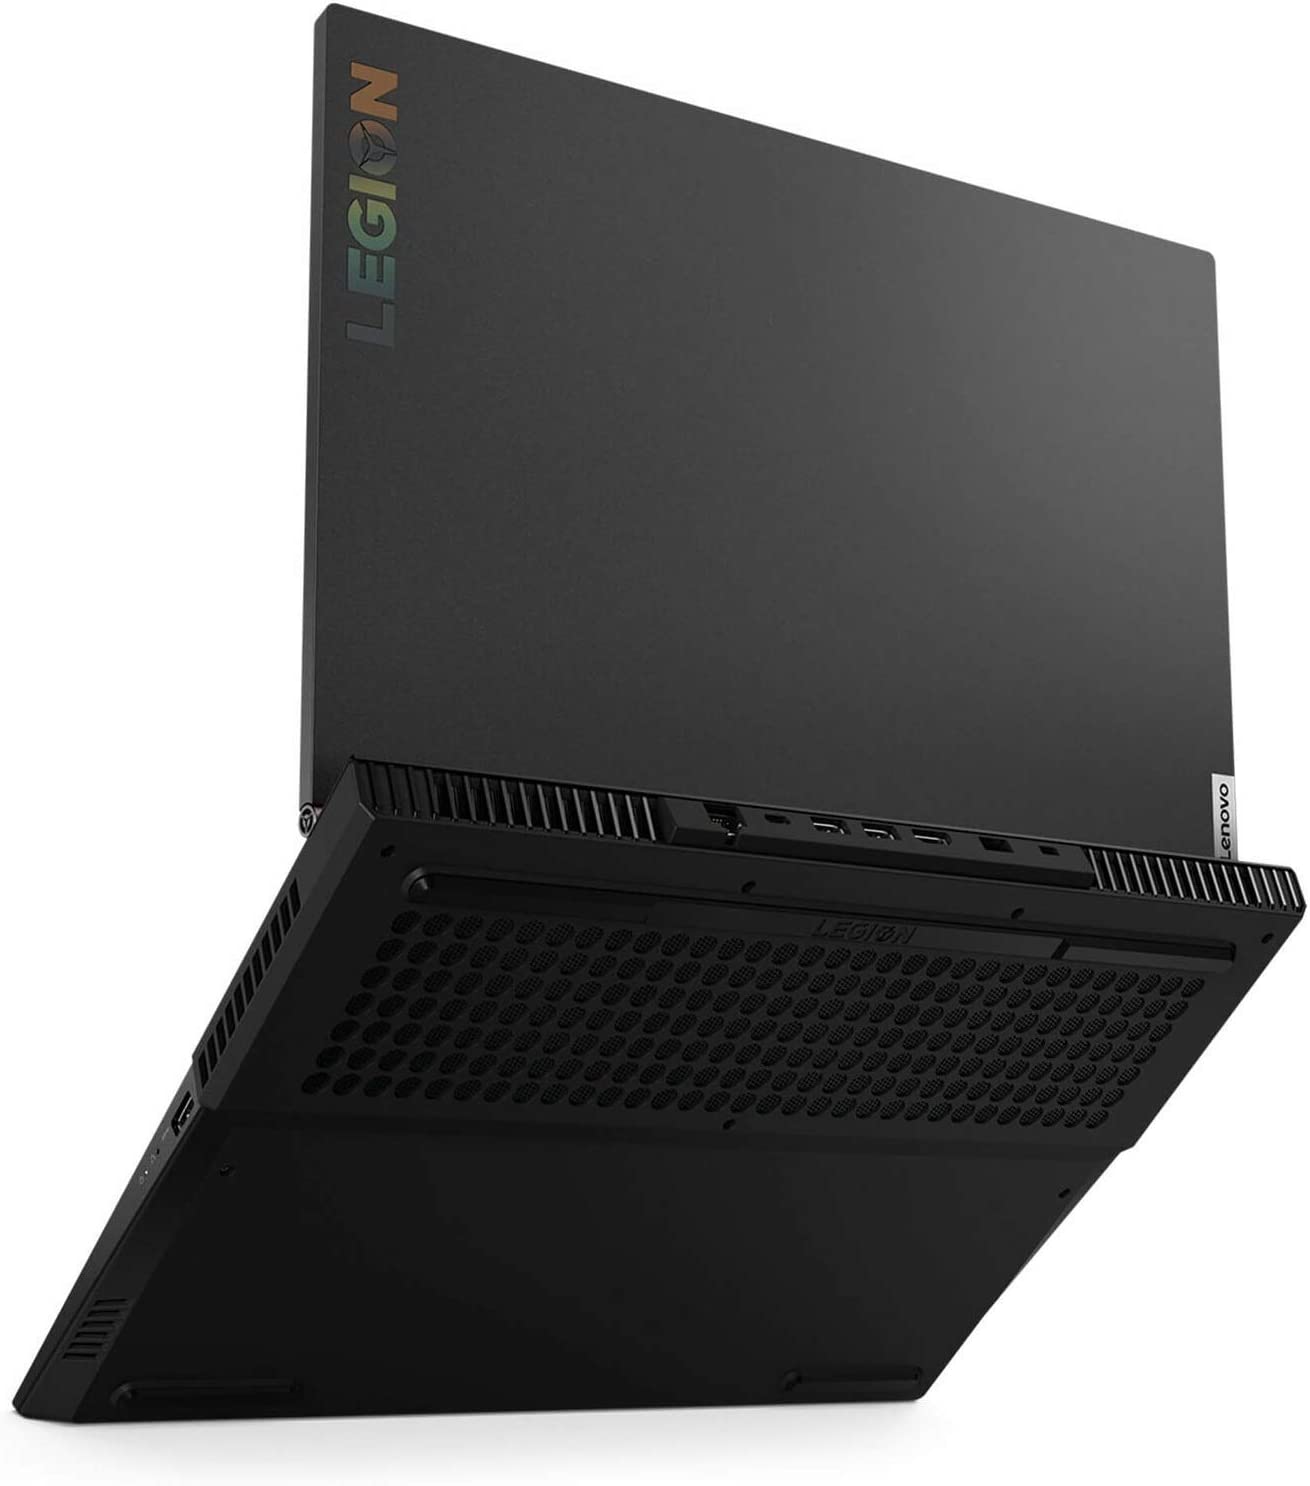 Back view and ventilation of the Lenovo Legion 5i gaming laptop